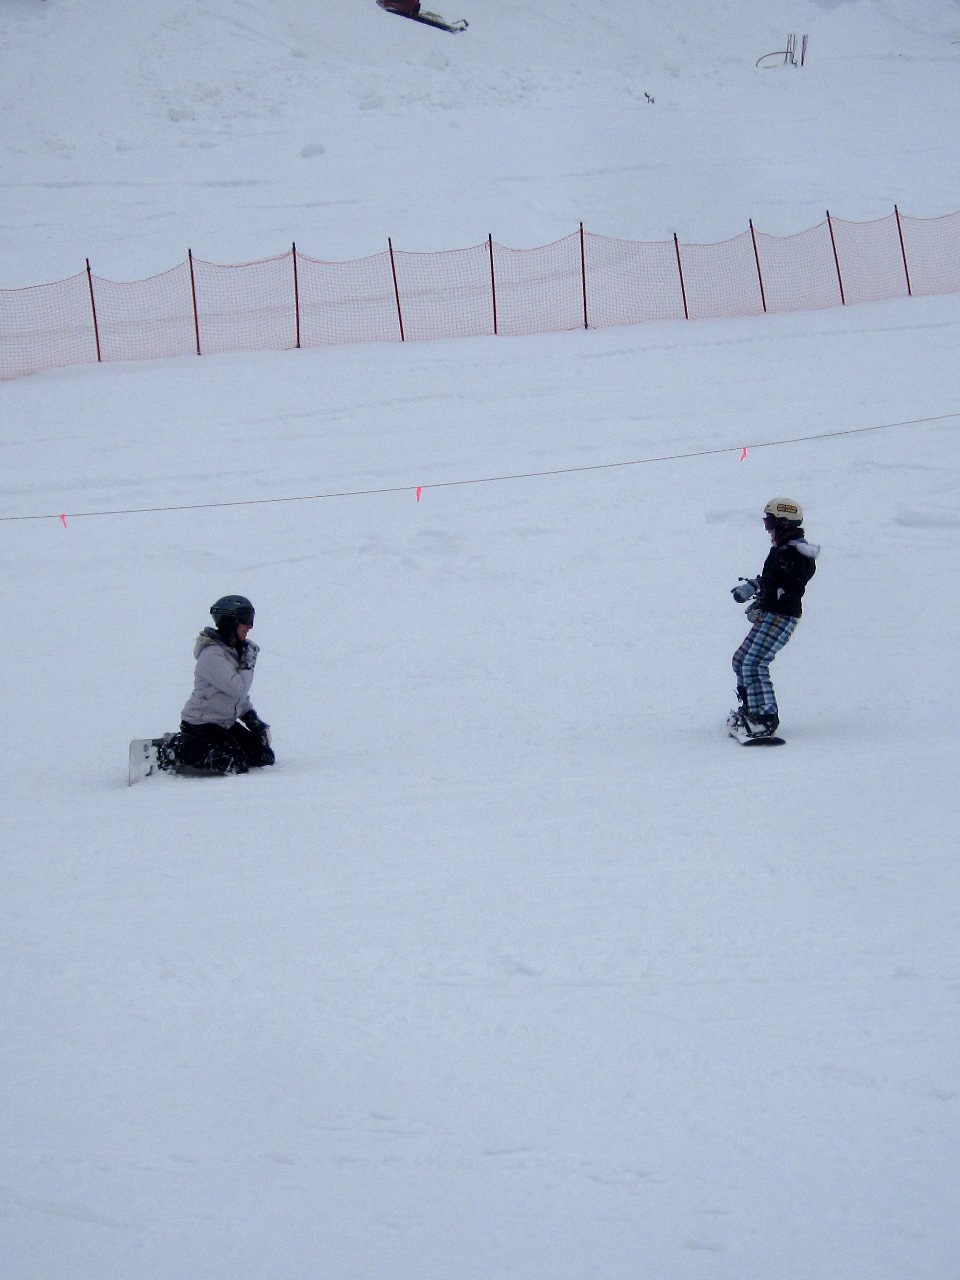 two people playing snowboard on a snowy slope